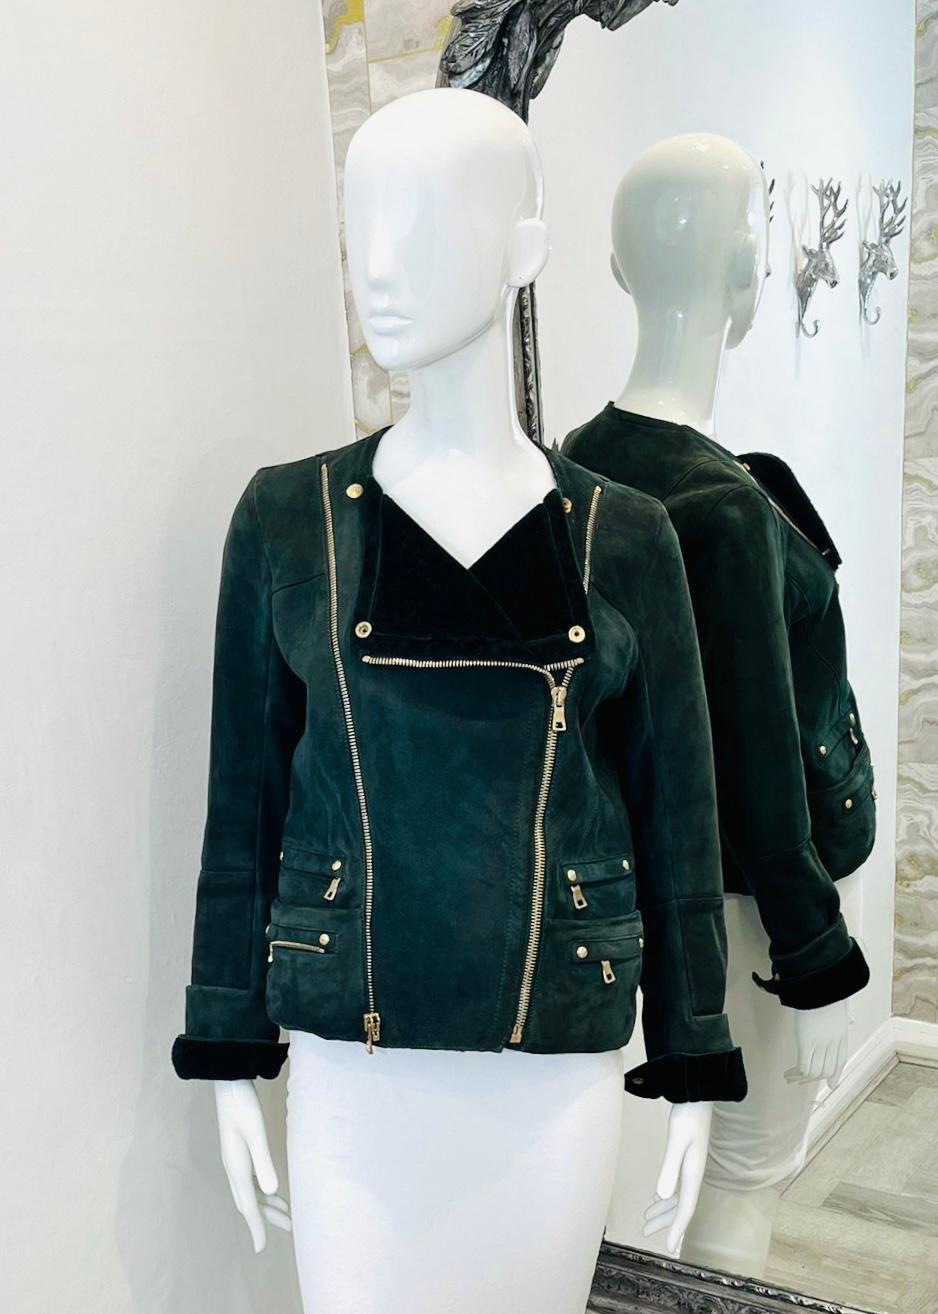 Balmain Lambskin Suede Biker Jacket

Dark green jacket designed with asymmetric zip fastening and four zipped pockets to the sides.

Detailed with gold Eagle embossed buttoned cuffs, dual zip accent and padded shoulders.

Size – 40FR

Condition –